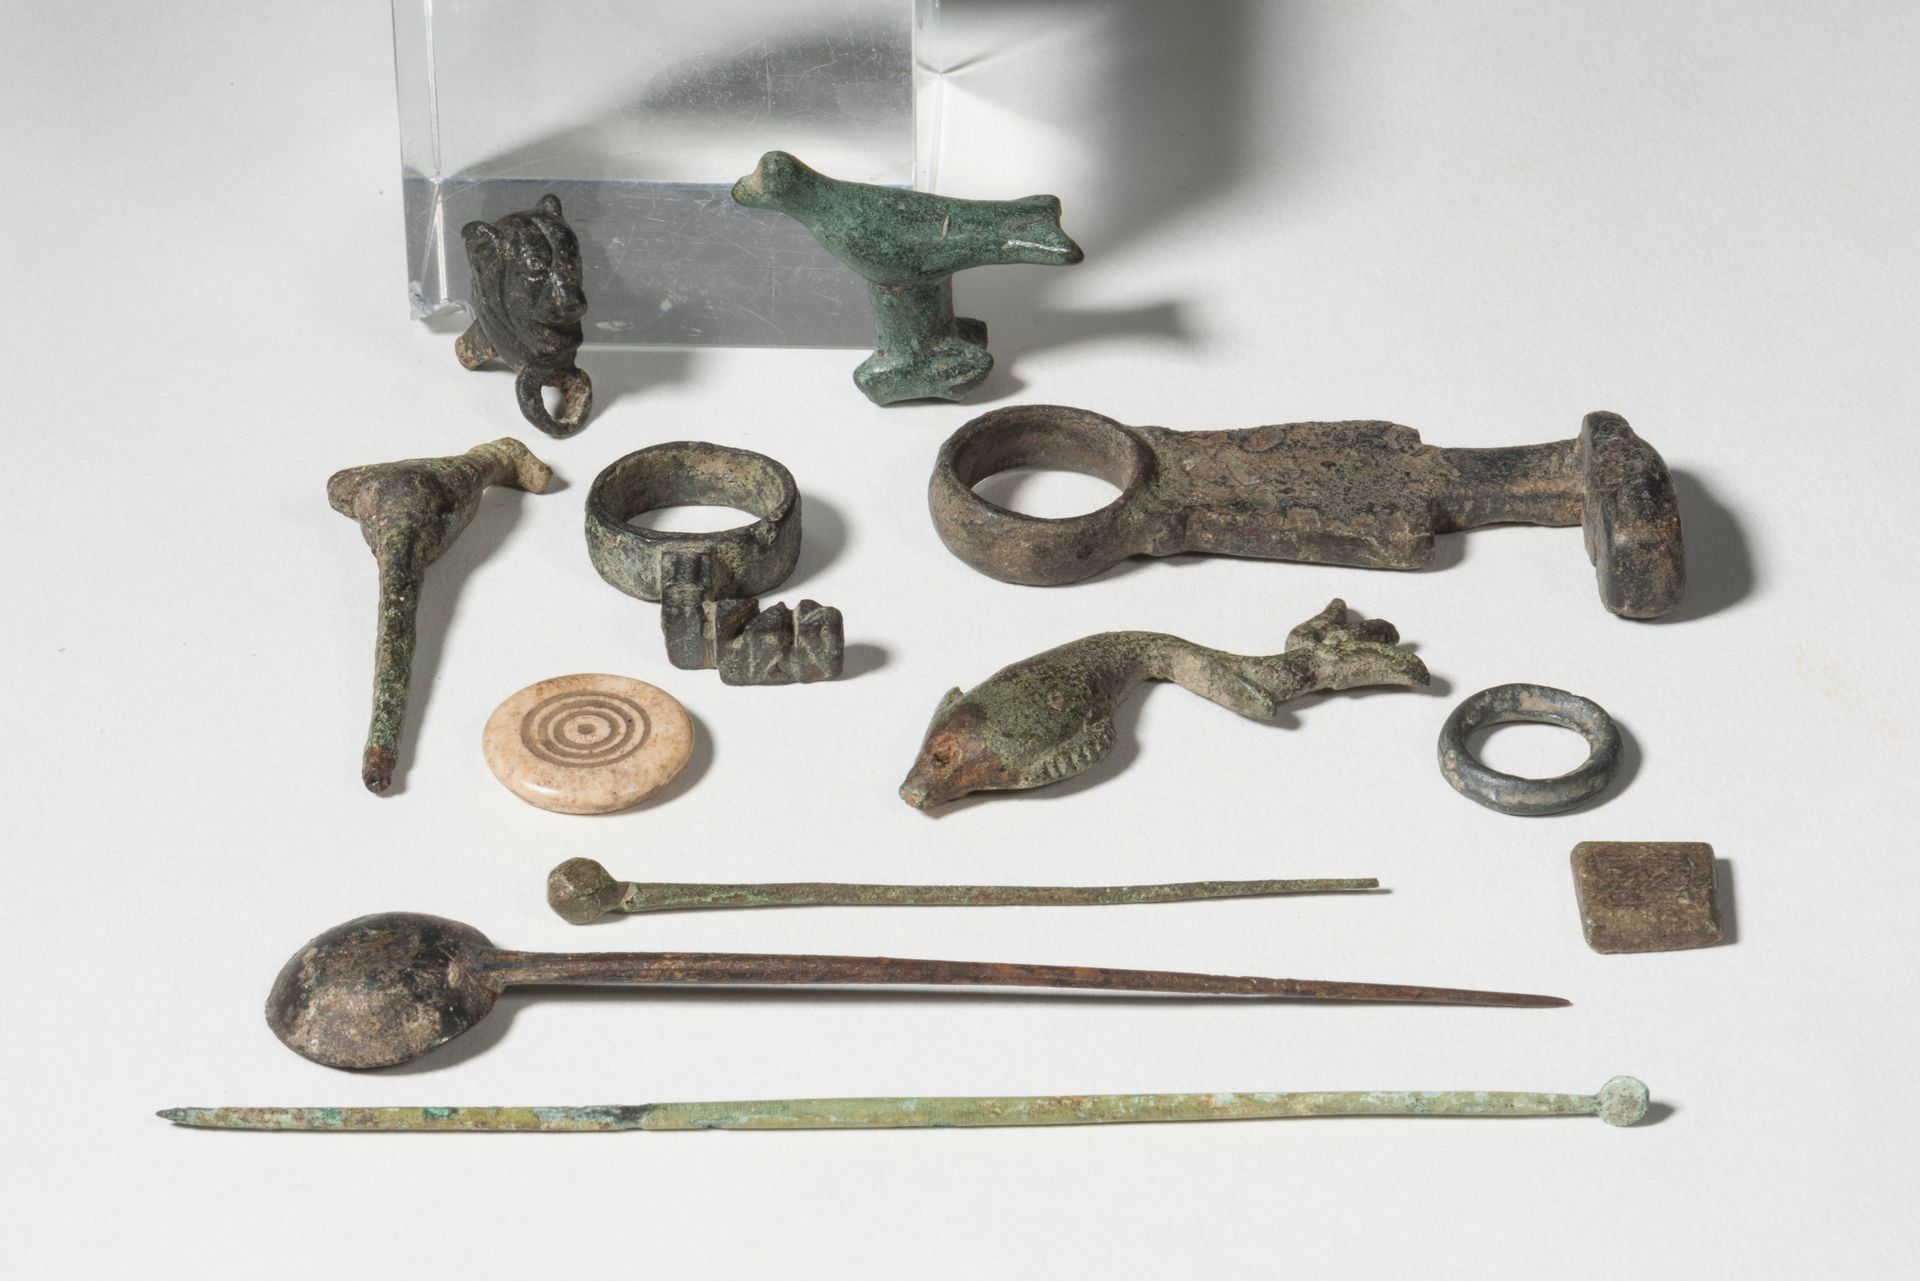 LOT ROMAN ERA

Lot composed of a ring wrench, a jointed wrench, a pin, a cosmeti&hellip;